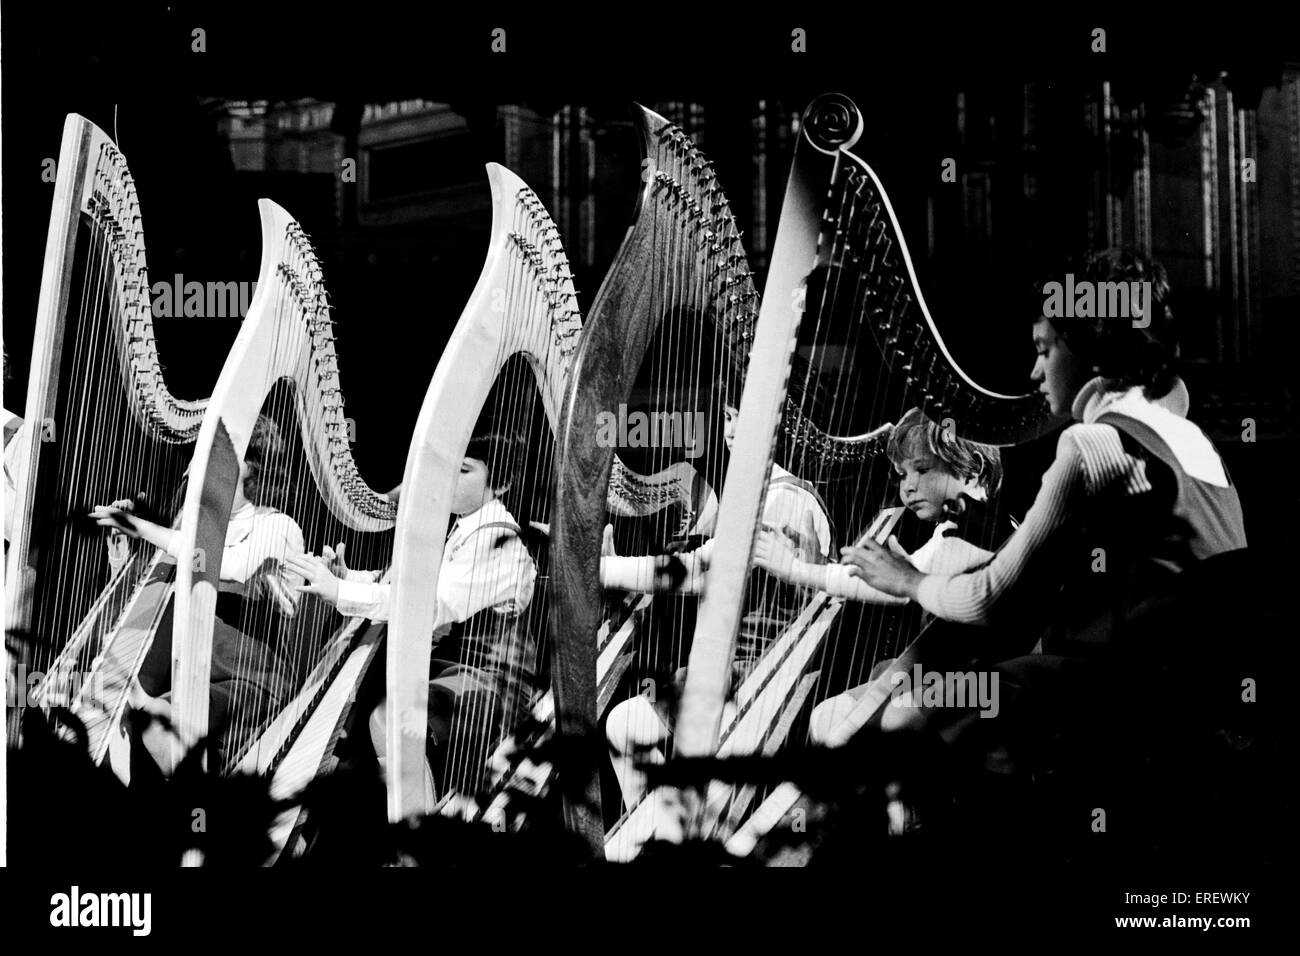 Graphic image of five harps played by young girls during one of the Schools Prom concerts at the Royal Albert Hall, London. Stock Photo